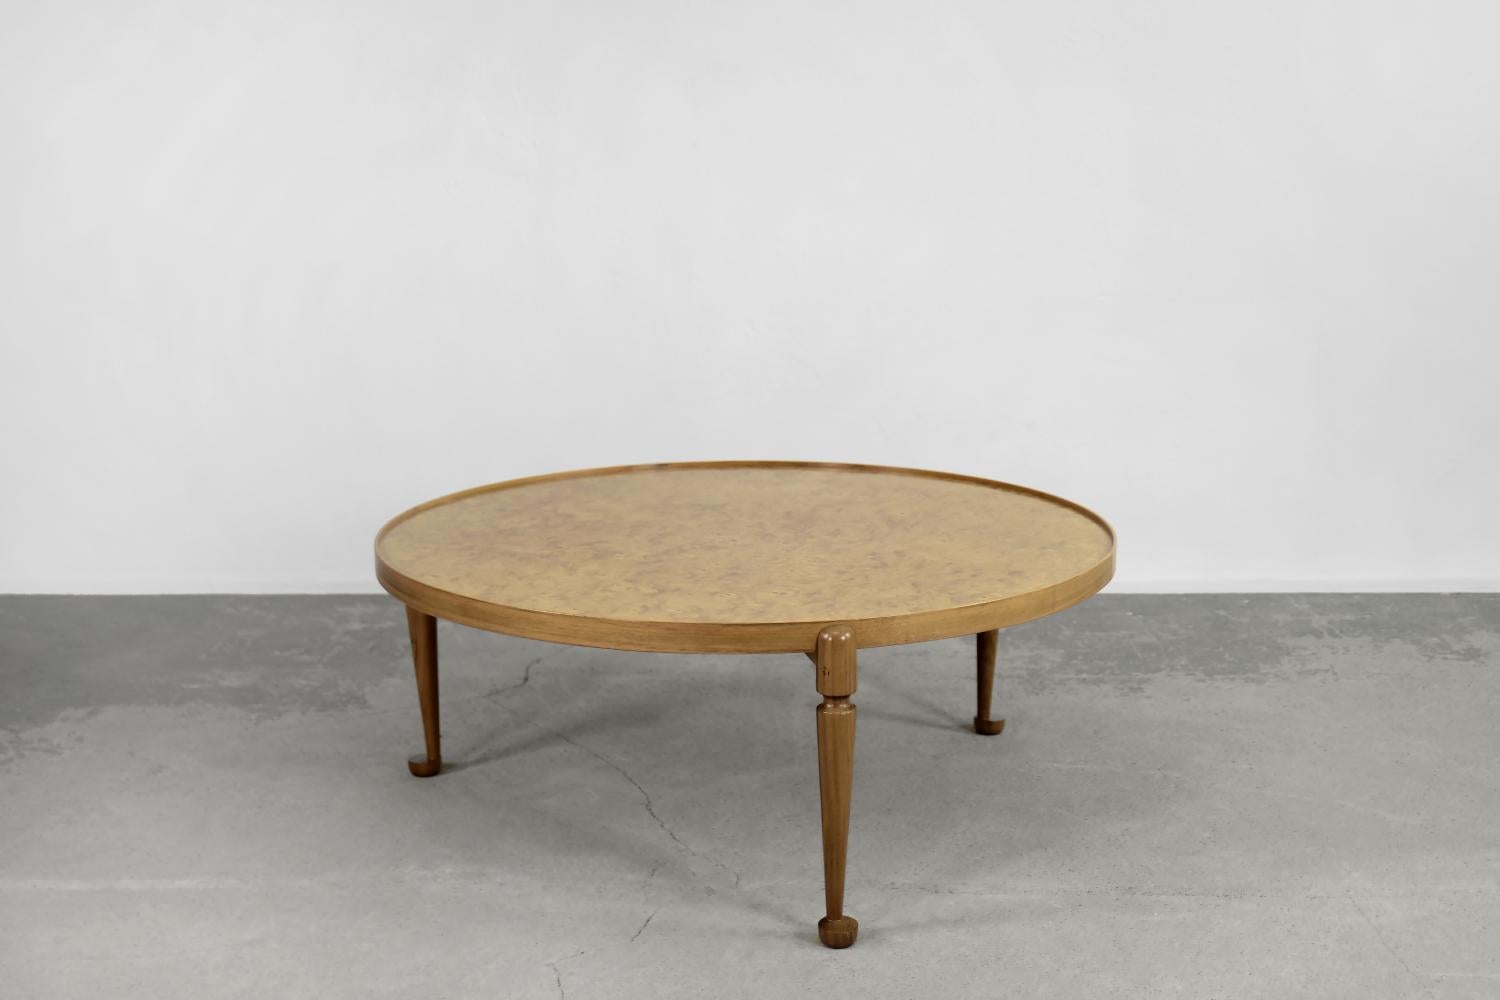 This luxurious, round 2139 table was designed by Josef Frank for the Swedish manufacture Svenskt Tenn in 1952 and made later. The table is made of walnut, and its characteristic feature is the richly patterned top made of elm burl. Josef Frank is a